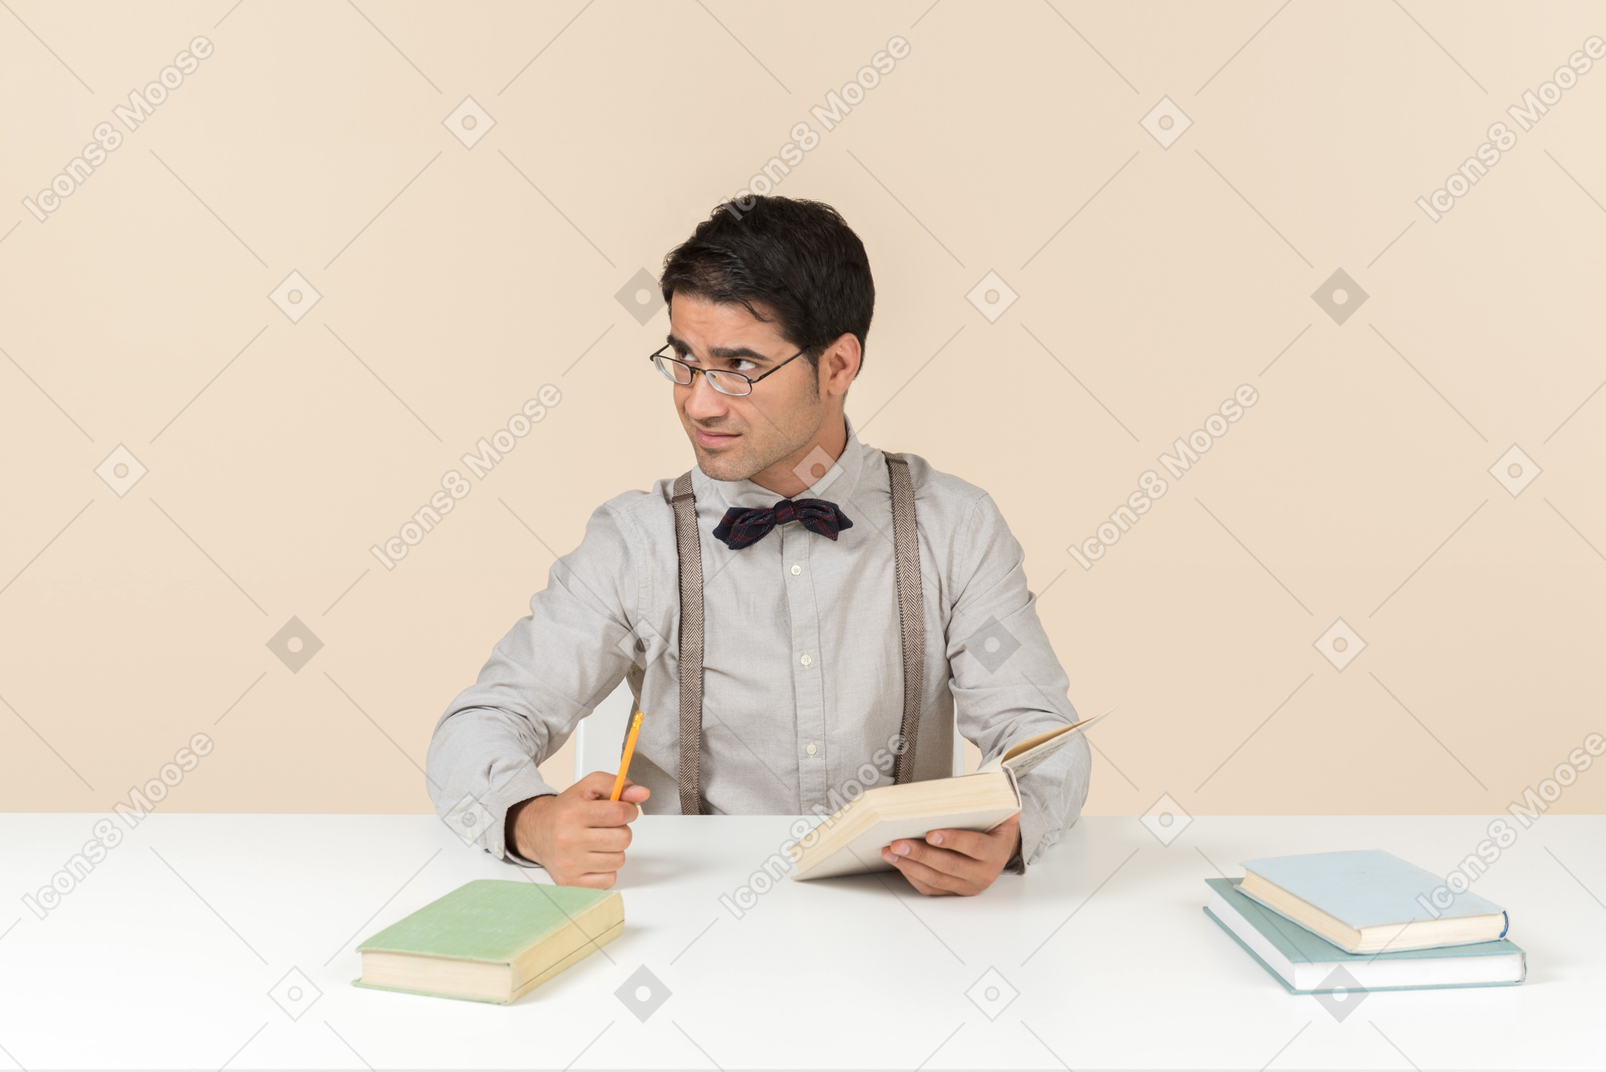 Professor sitting at the table and reading books